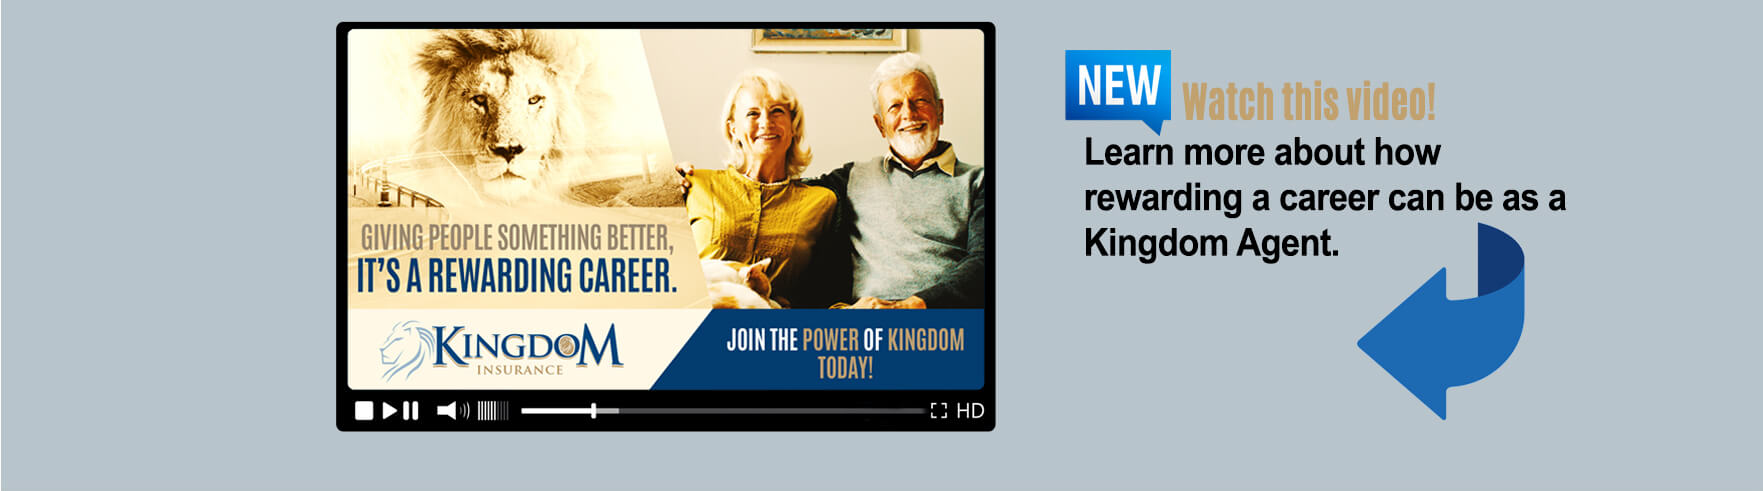 Learn more about how rewarding a career as a Kingdom agent can be.